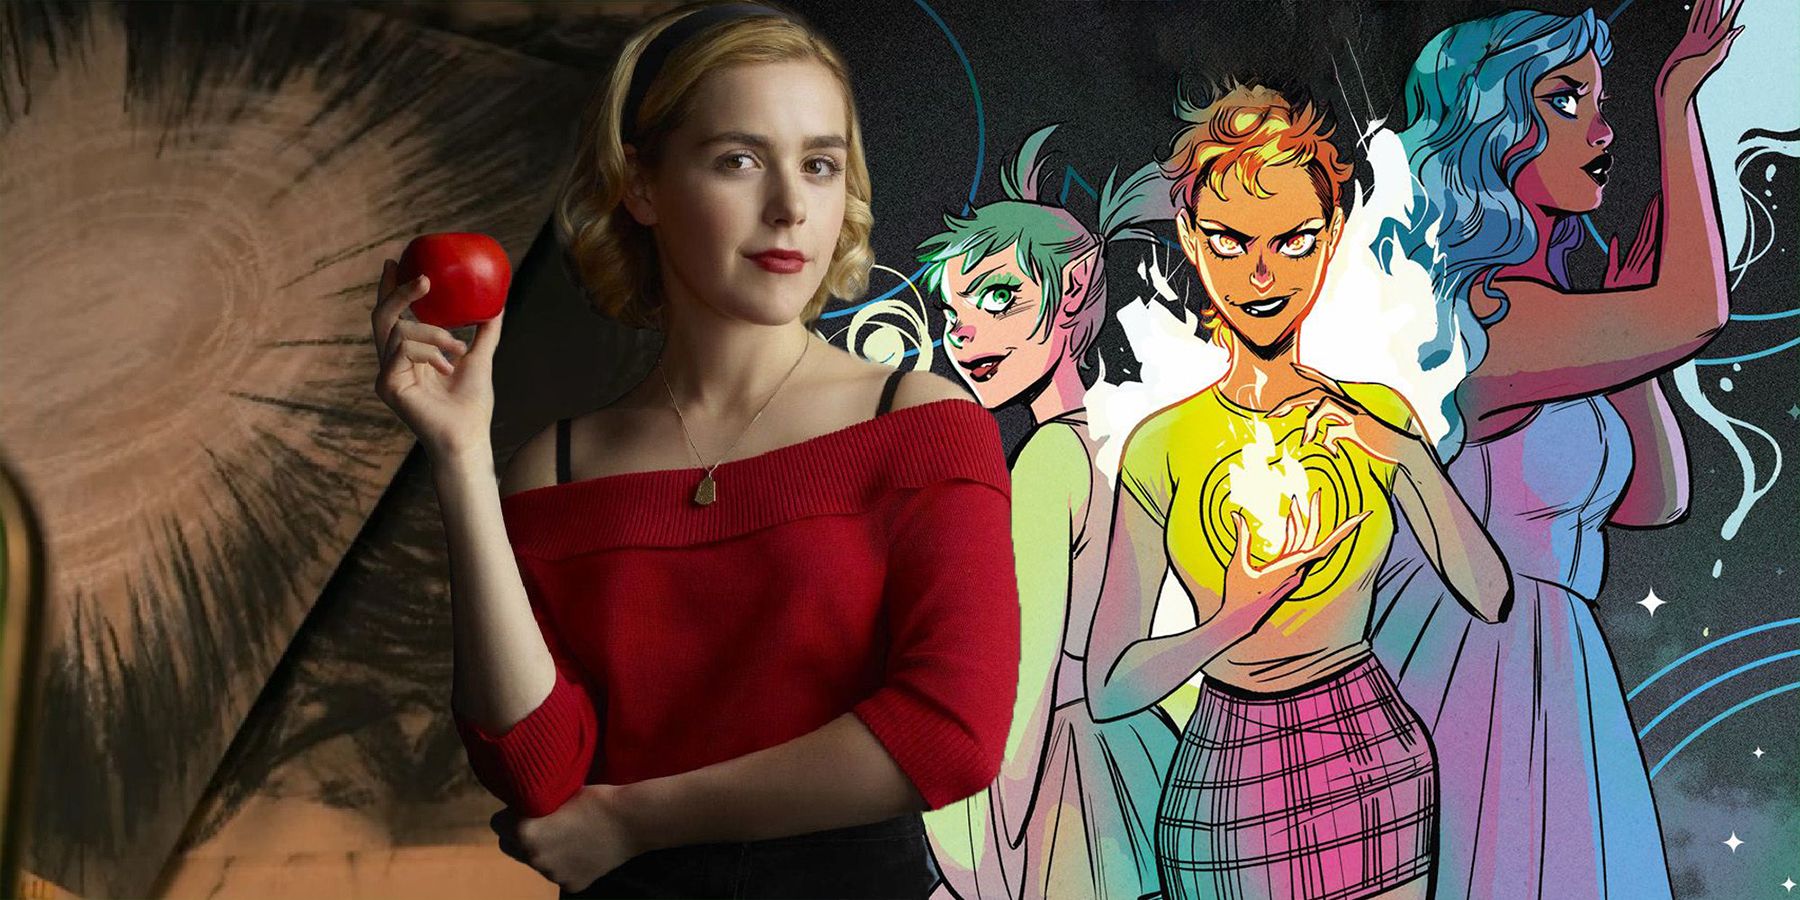 Sabrina Spellman from Chilling Adventures of Sabrina composed with the cover art for The Wicked Trinity #1